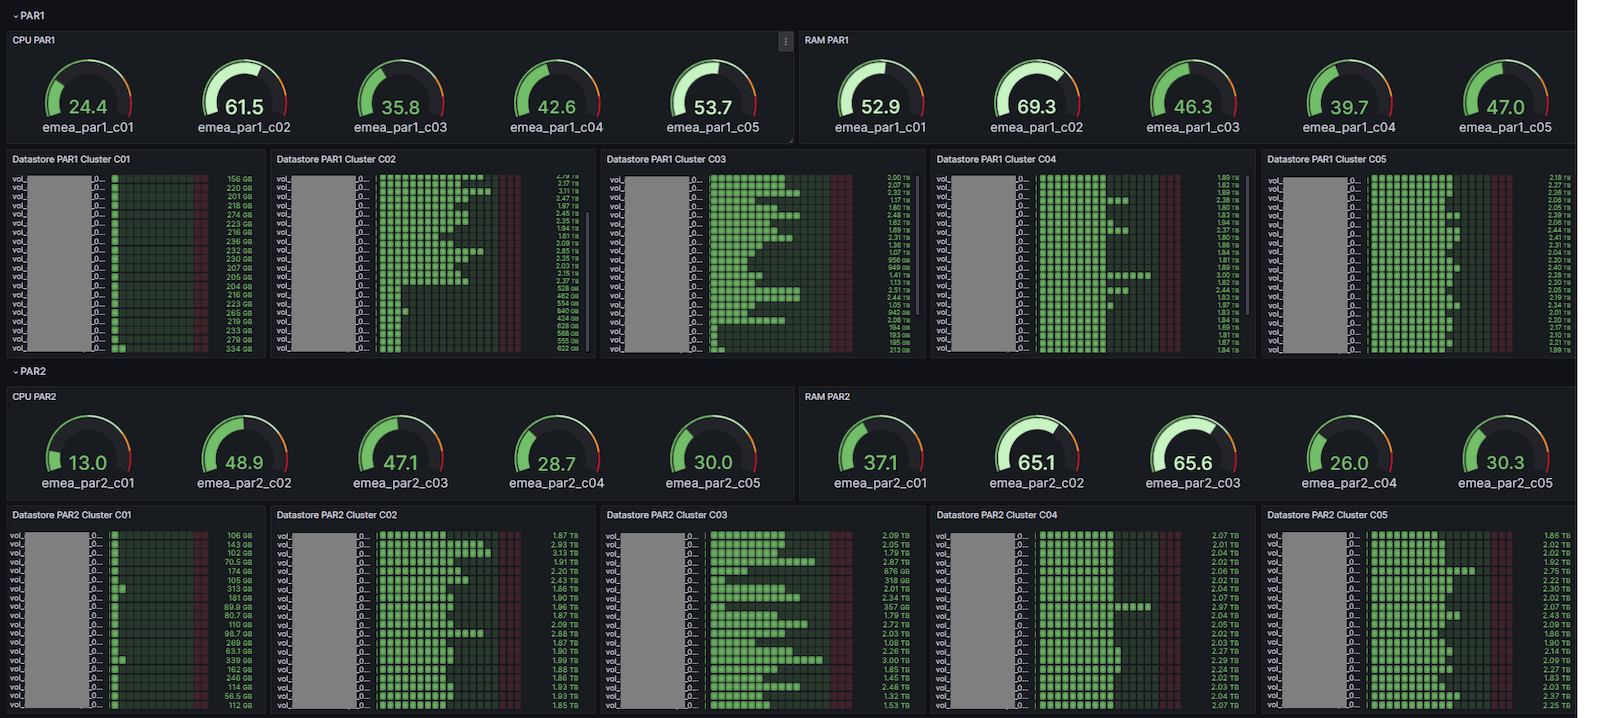 A screenshot of a Grafana dashboard with different types of gauges visualizing storage capacity